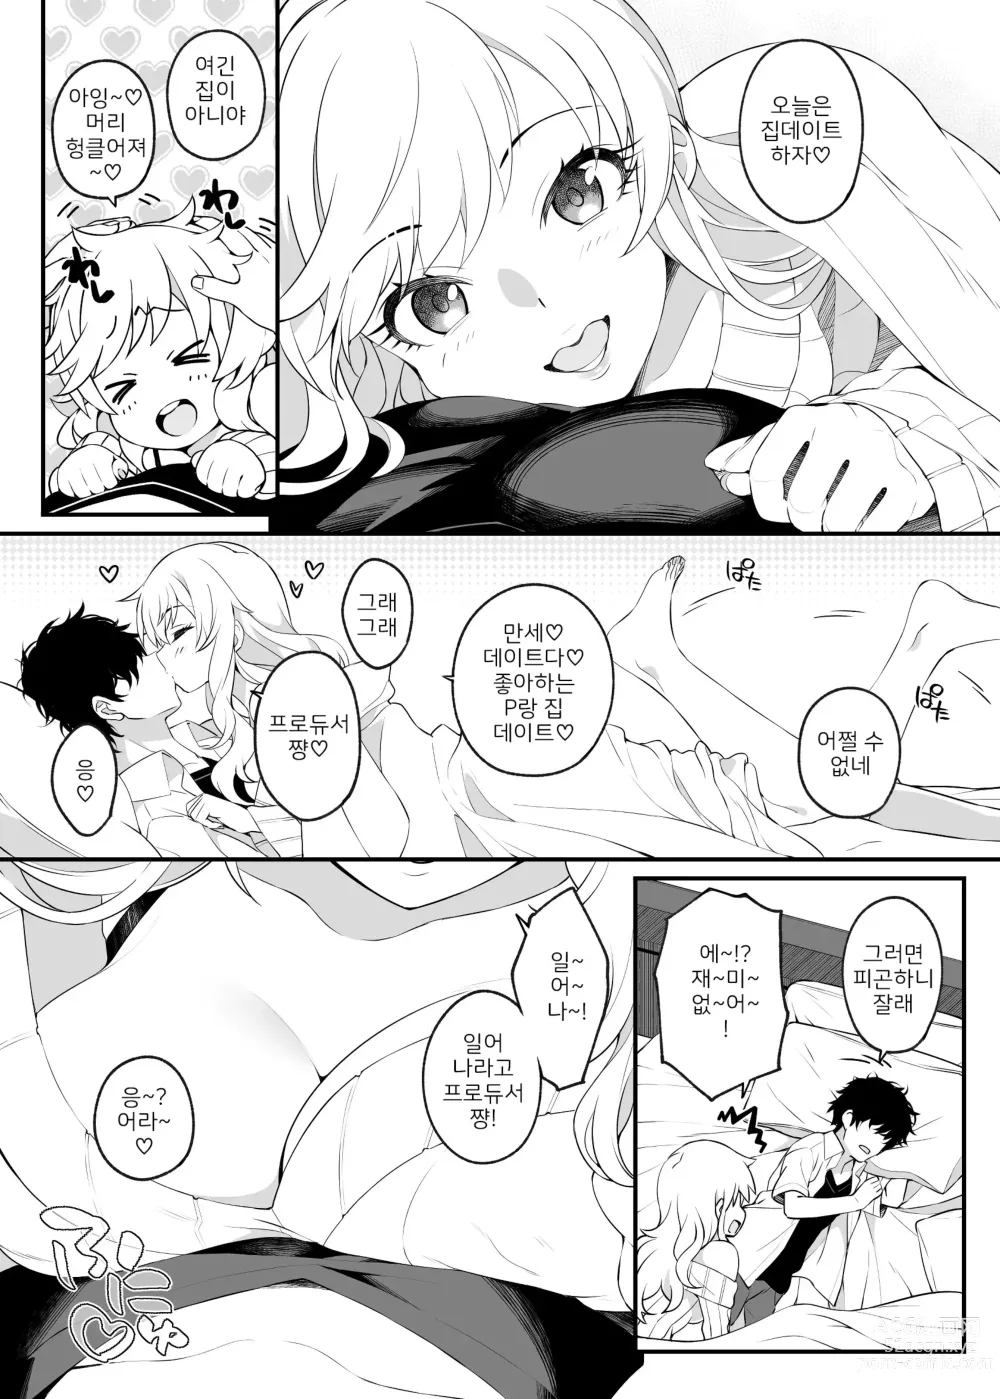 Page 4 of doujinshi Torima Pakocchao - You dont have to think about difficult things, do you?